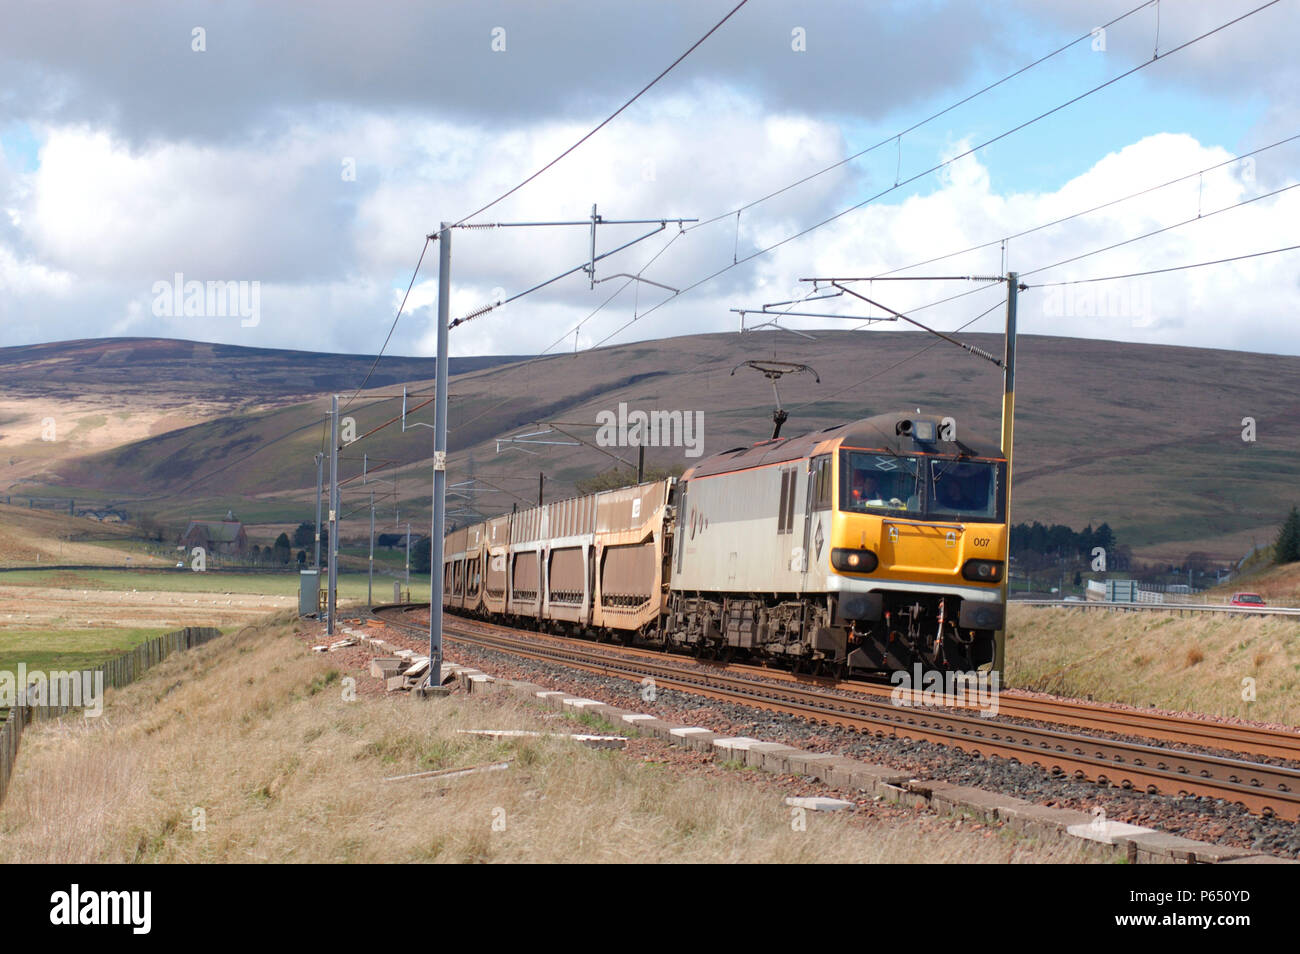 A Class 92 multi-voltage electric locomotive curves through the Upper Clyde valley on the ascent of Beattock with a Mossend - Carlisle Enterprise serv Stock Photo